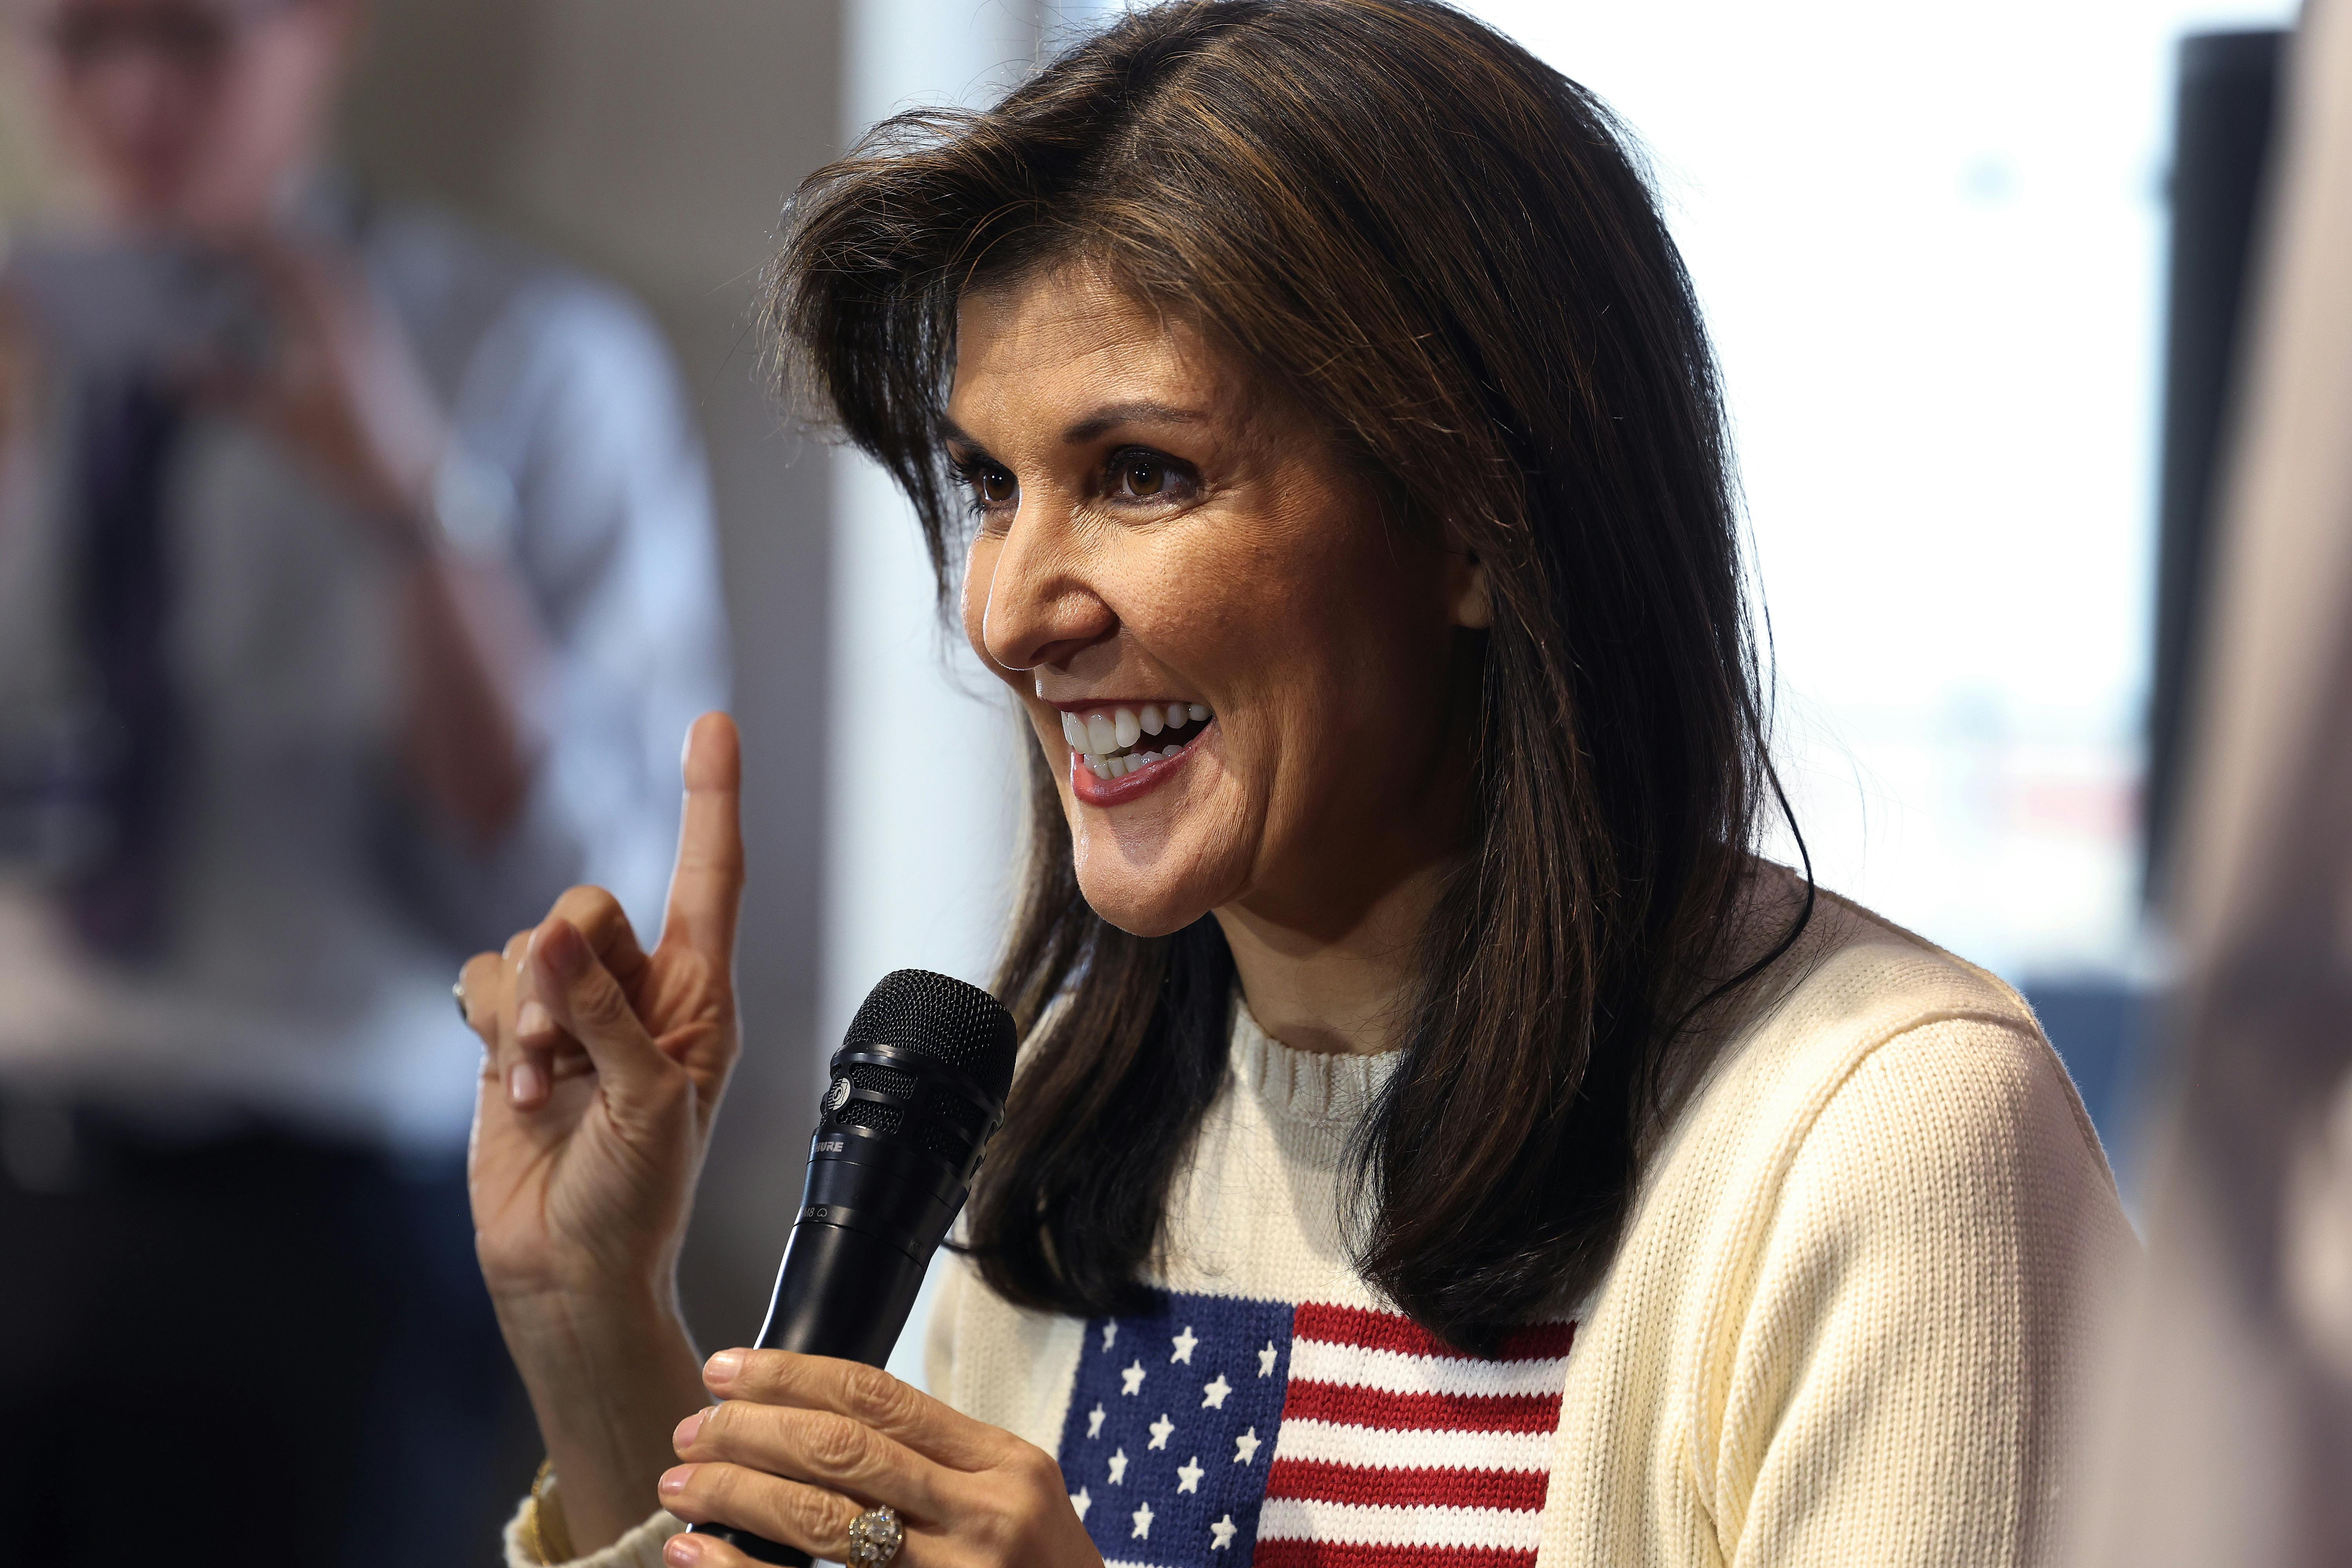 Headshave Slave - Nikki Haley Is So Unhinged She Renamed Her Husband | The New Republic